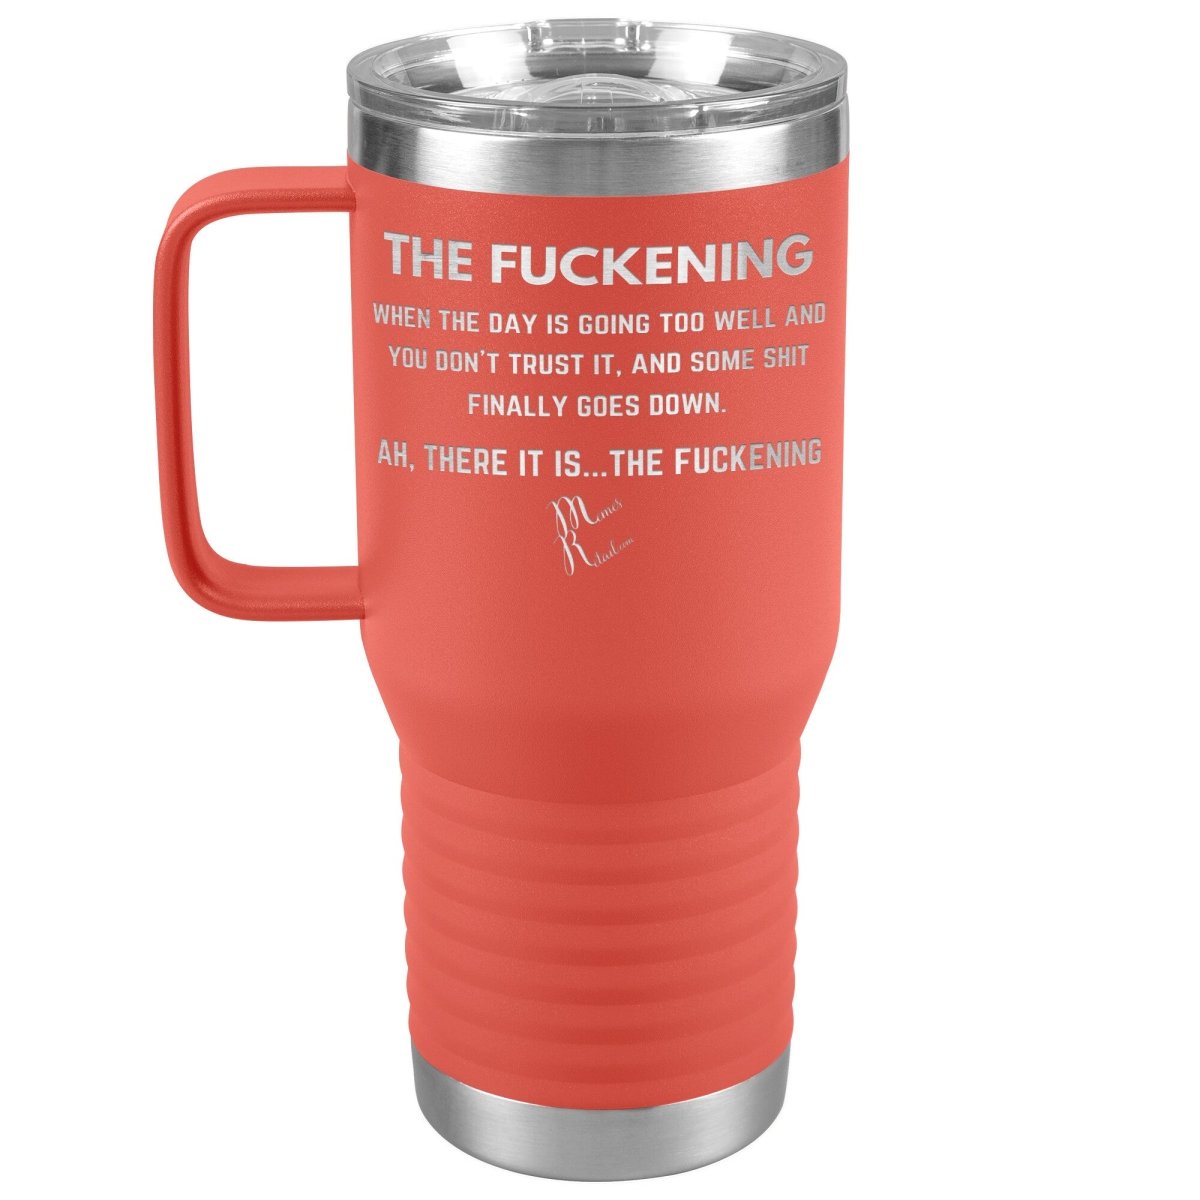 The Fuckening, When you don't trust the day Tumblers, 20oz Travel Tumbler / Coral - MemesRetail.com